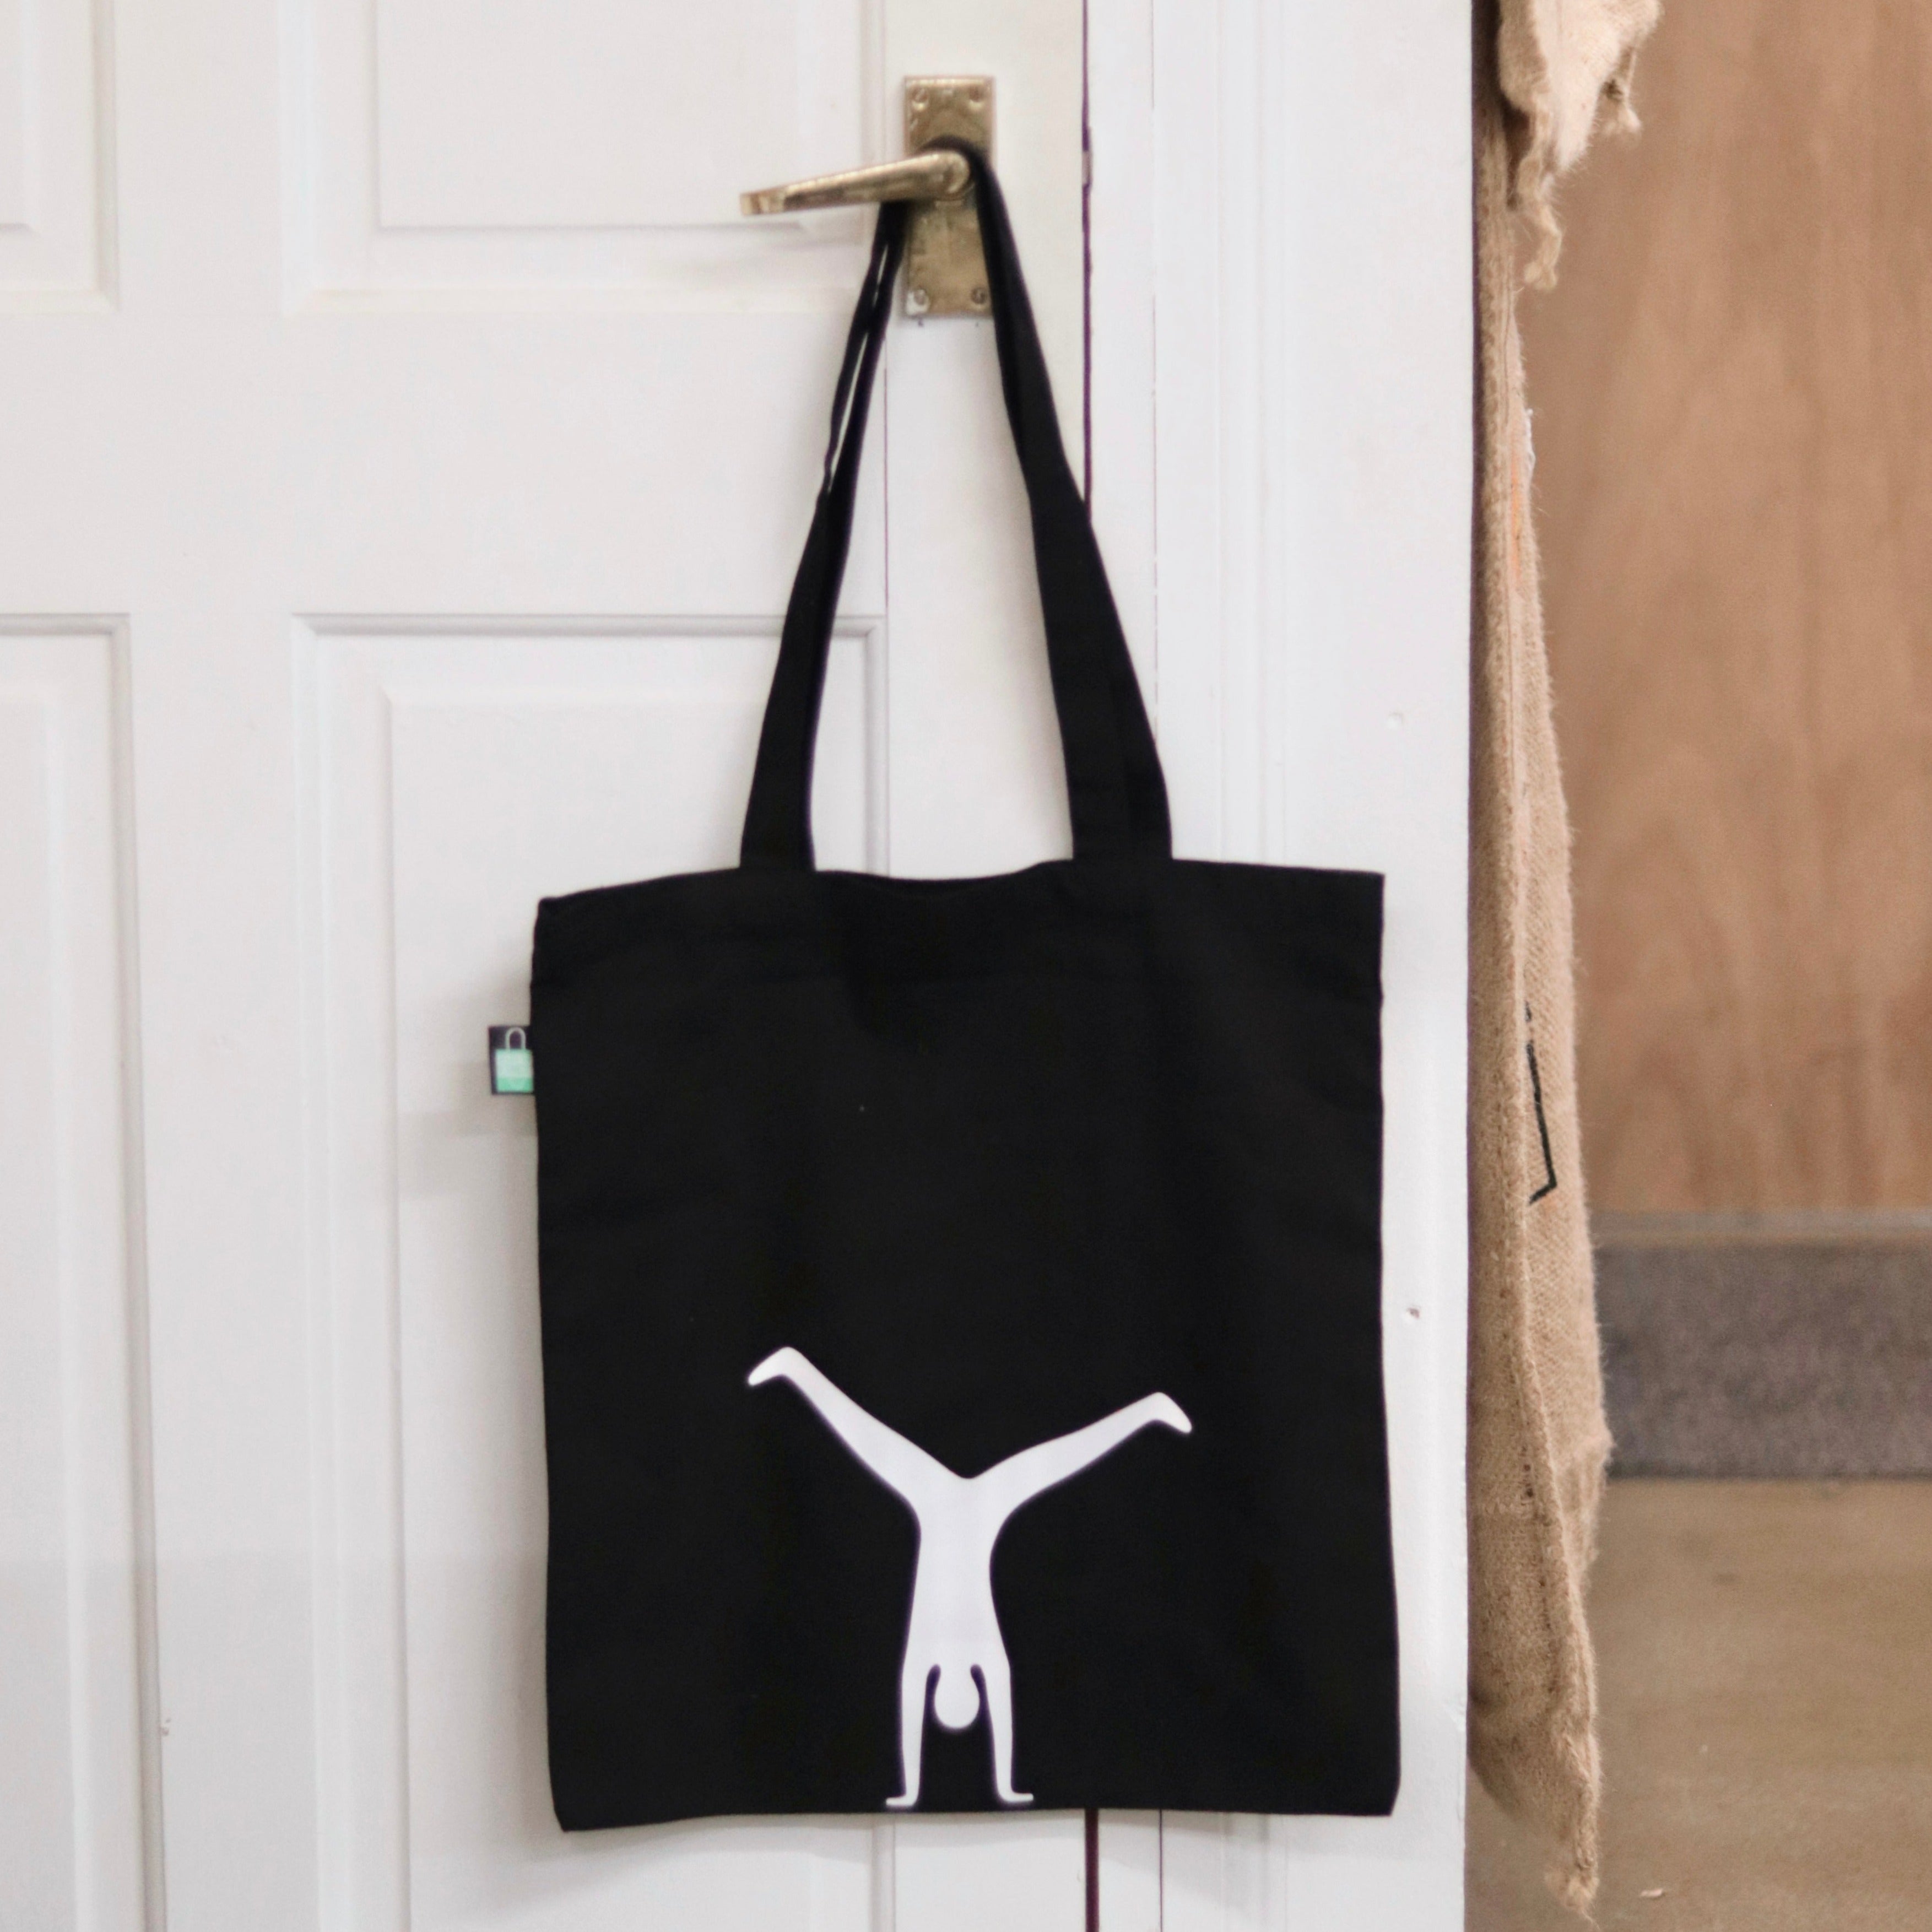 Ethical Tote Bags